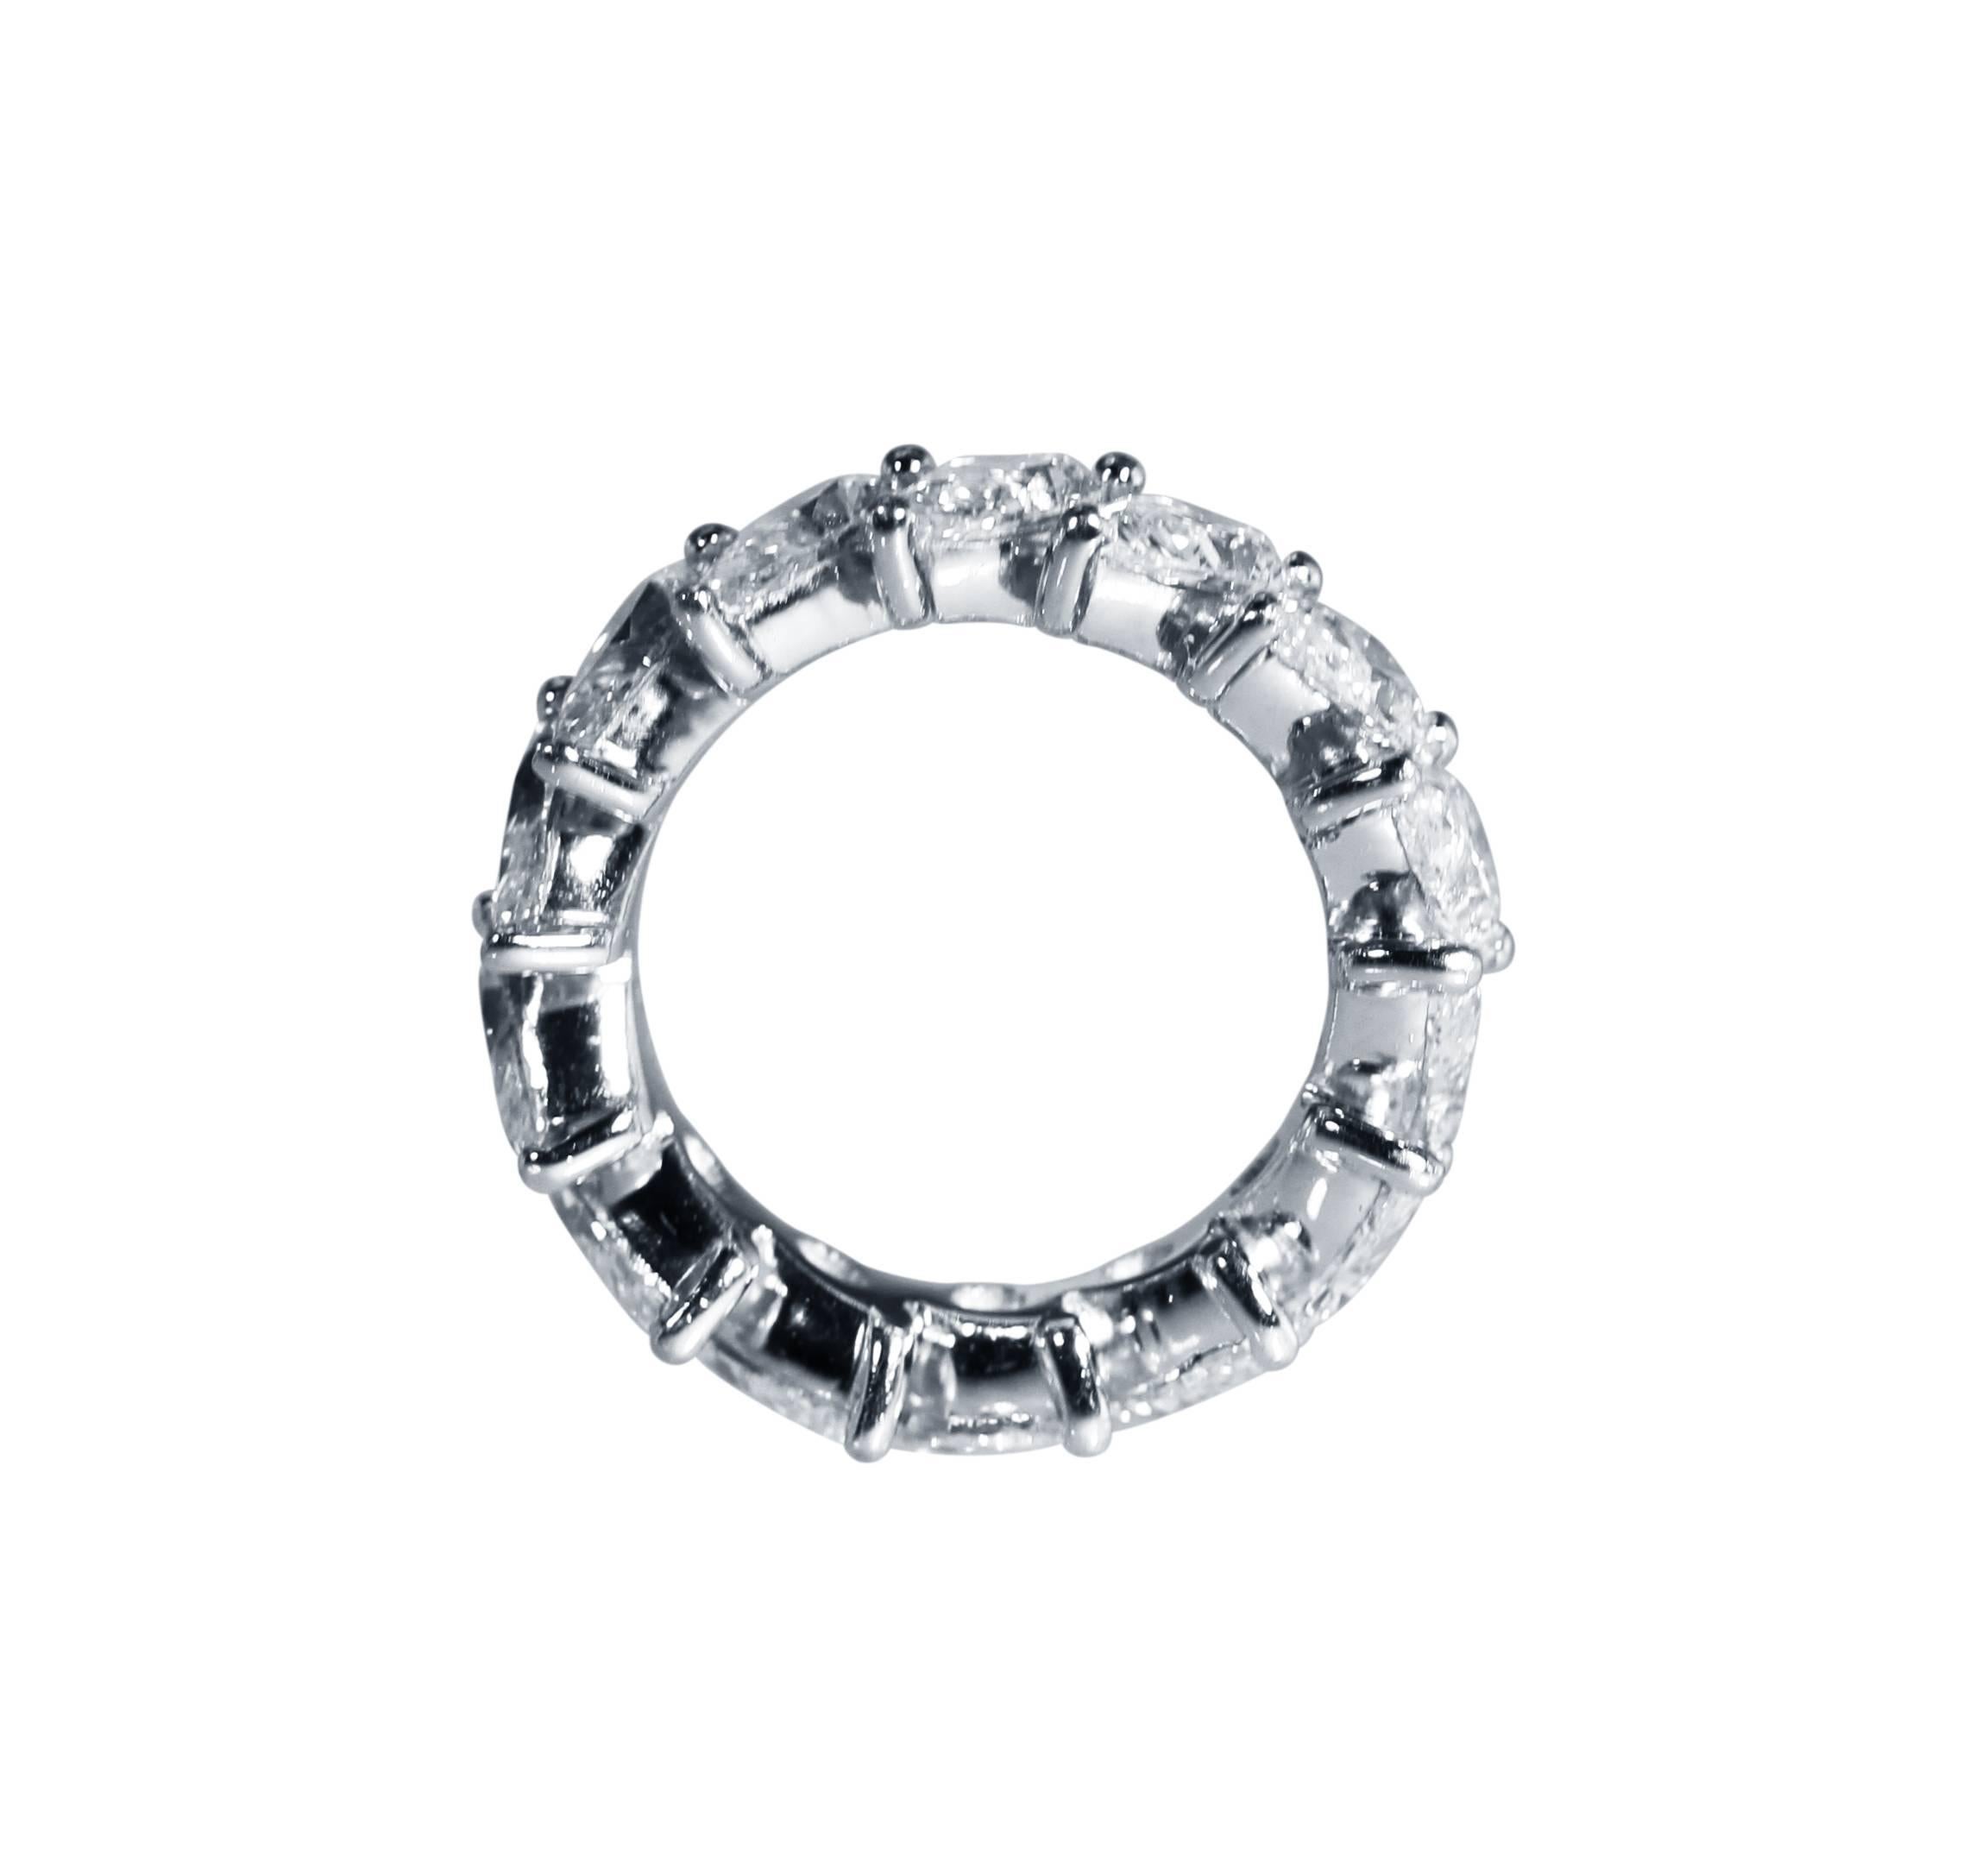 A platinum and diamond eternity band ring by Graff, set at an angle with 14 pear-shaped diamonds weighing 7.36 carats, gross weight 10.3 grams, size 5 3/4, signed Graff, numbered 9262.
Accompanied by Insurance Appaisal Document from Graff at 61,000